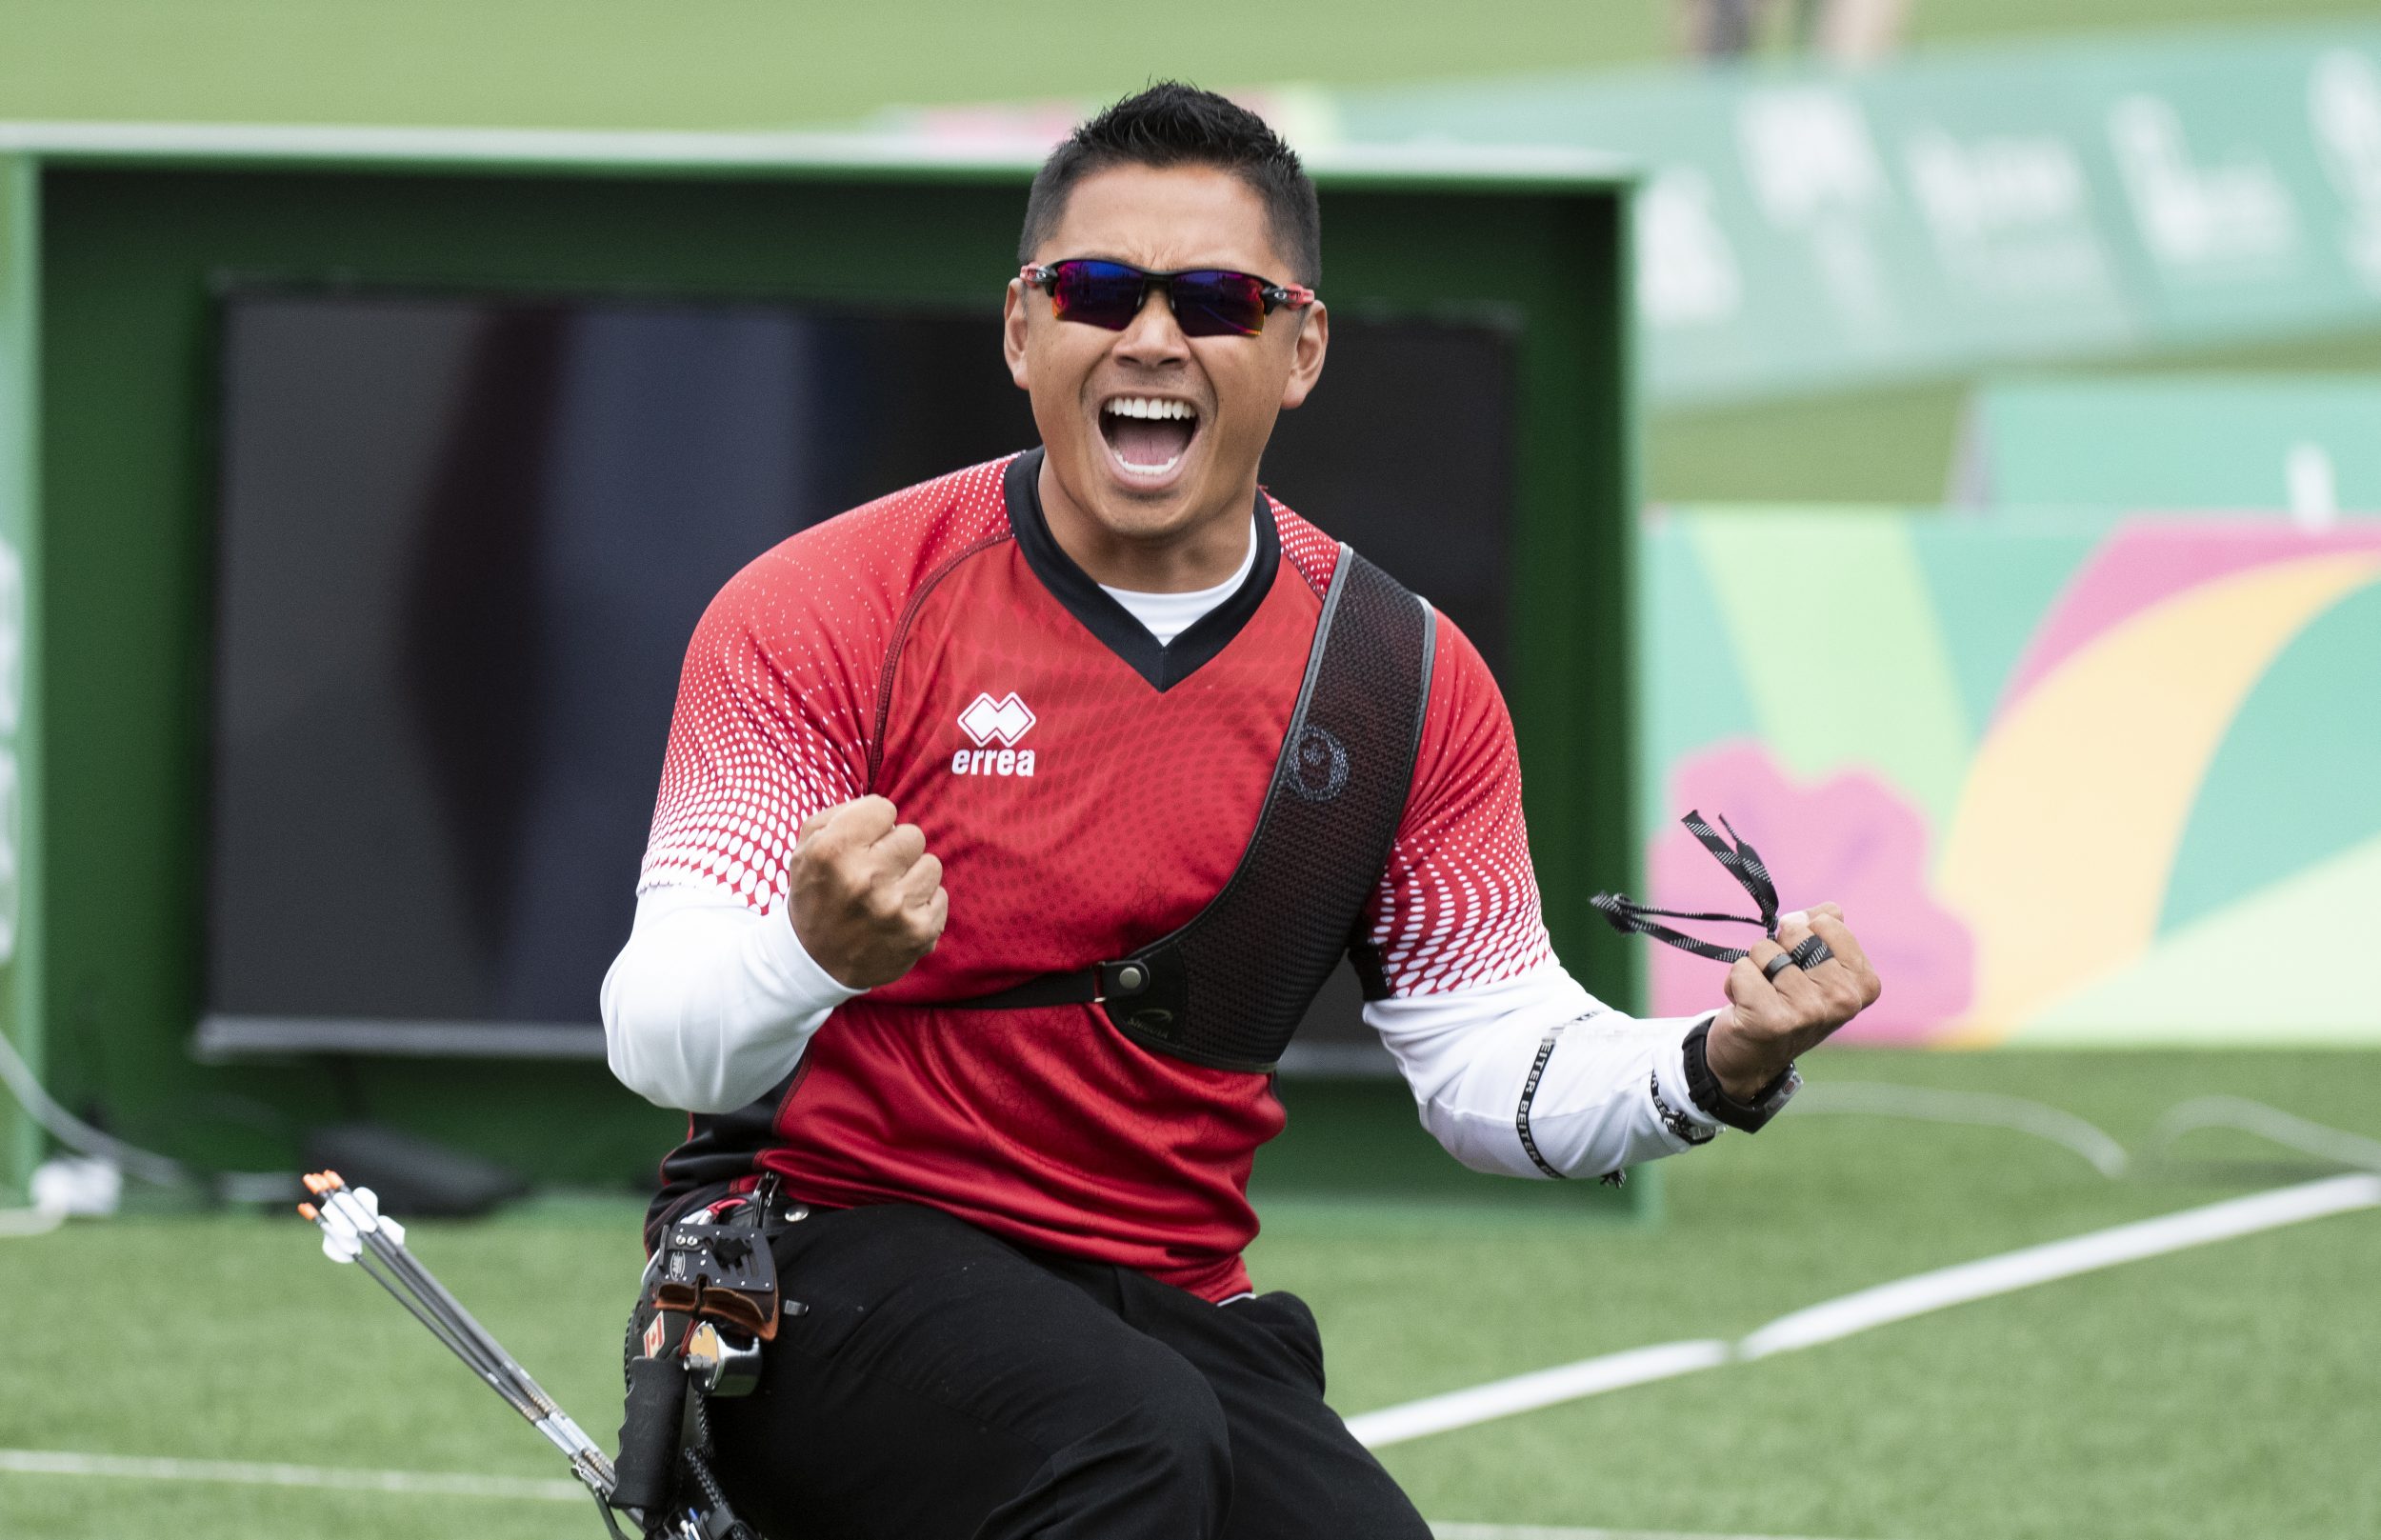 https://olympic.ca/2019/08/11/day-16-at-lima-2019-team-canada-ends-competition-with-152-medals/team-canada-crispin-duenas-2/